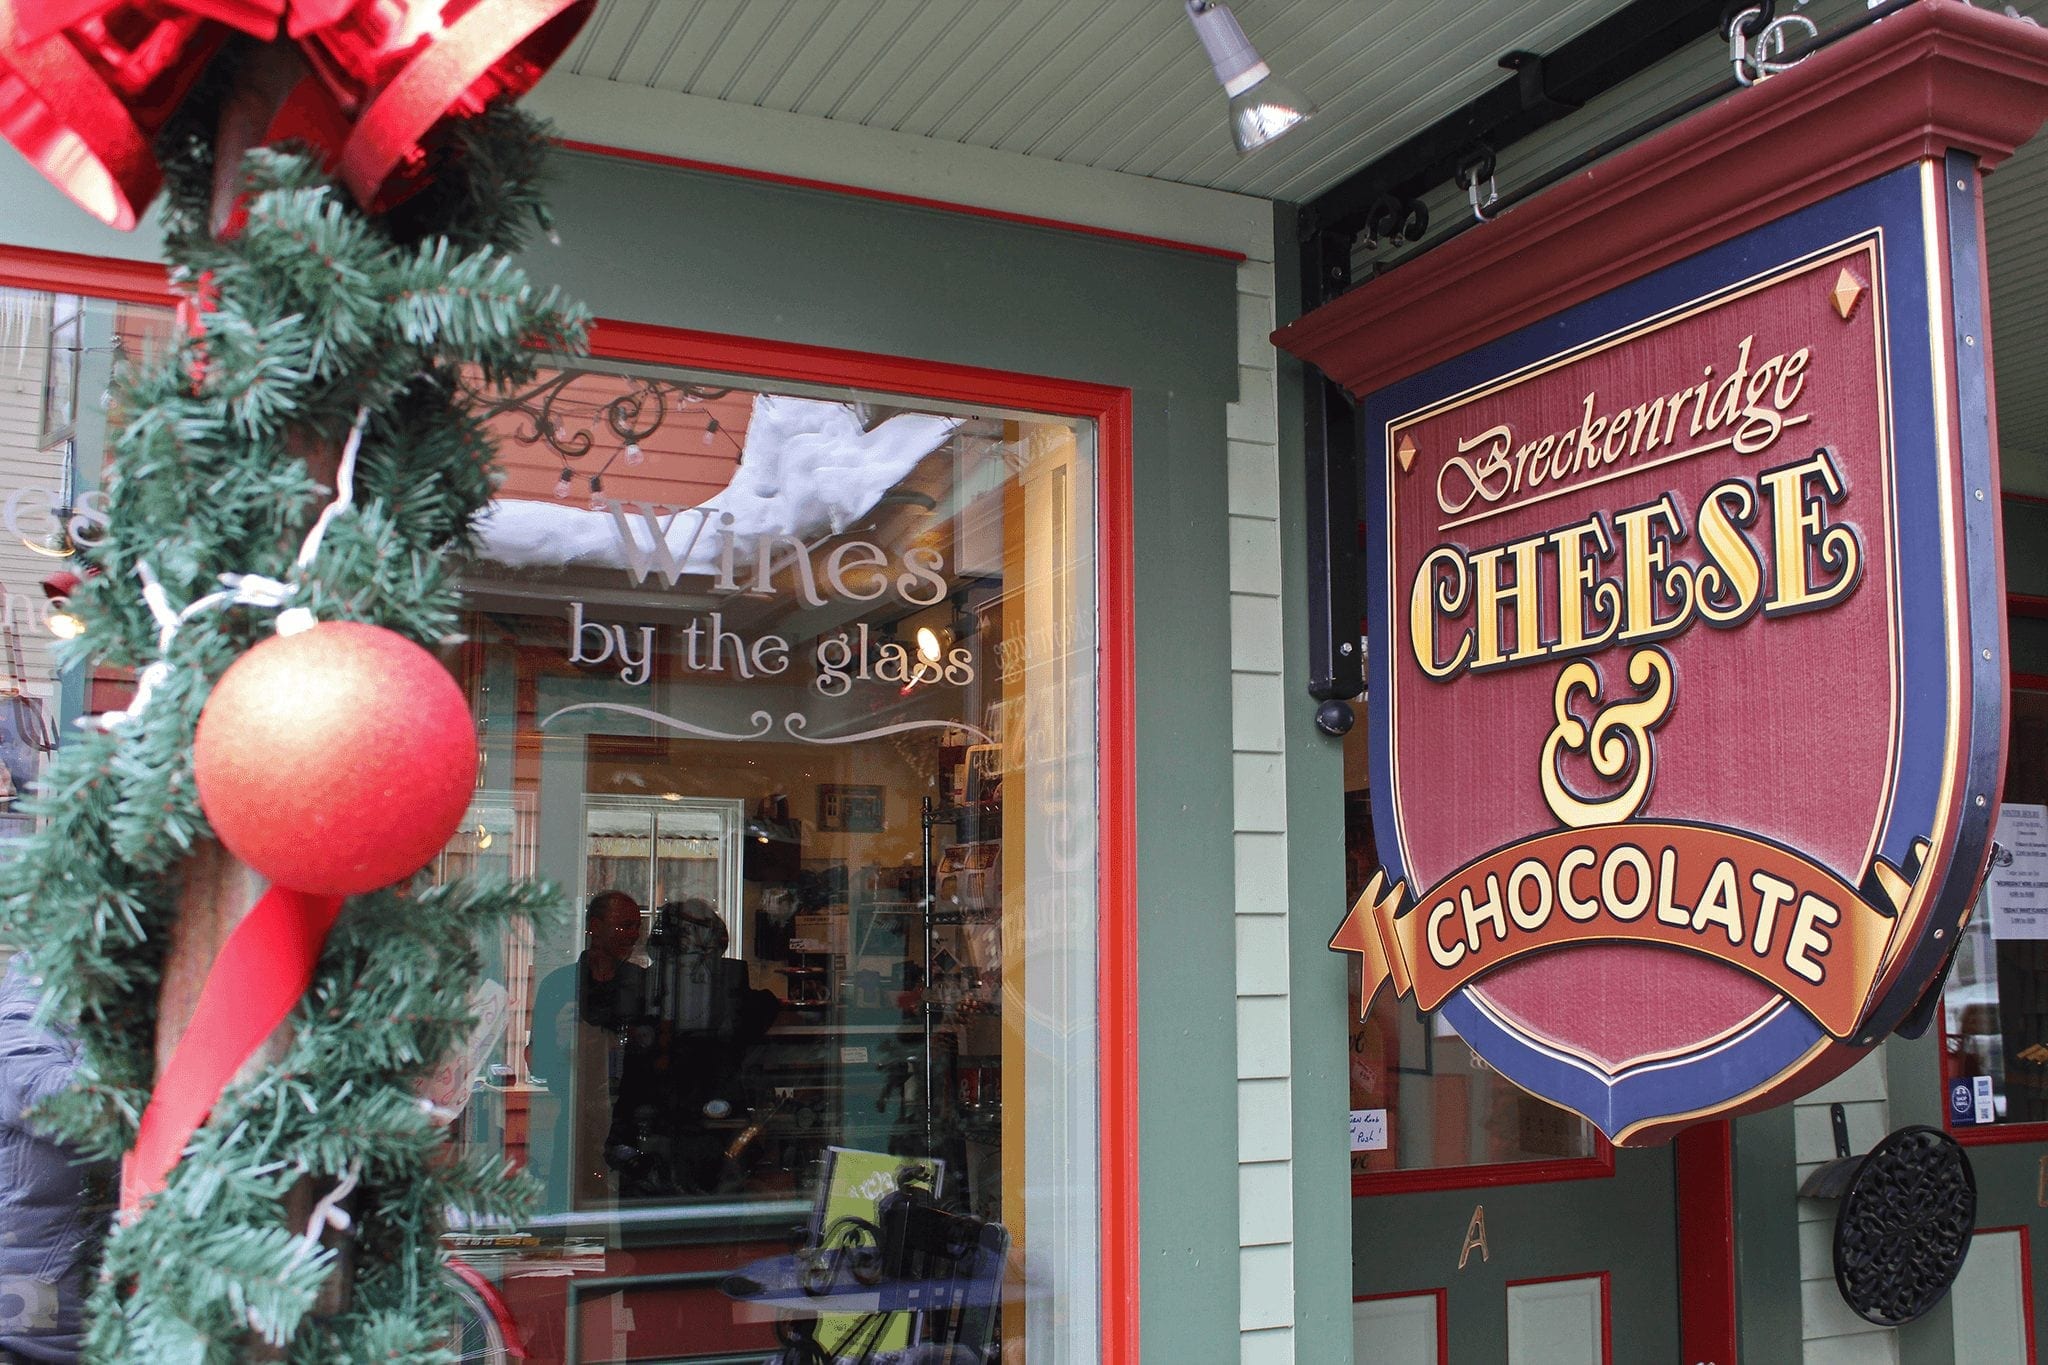 Breckenridge Cheese and Chocolate is the perfect spot for a ladies night in Breckenridge.